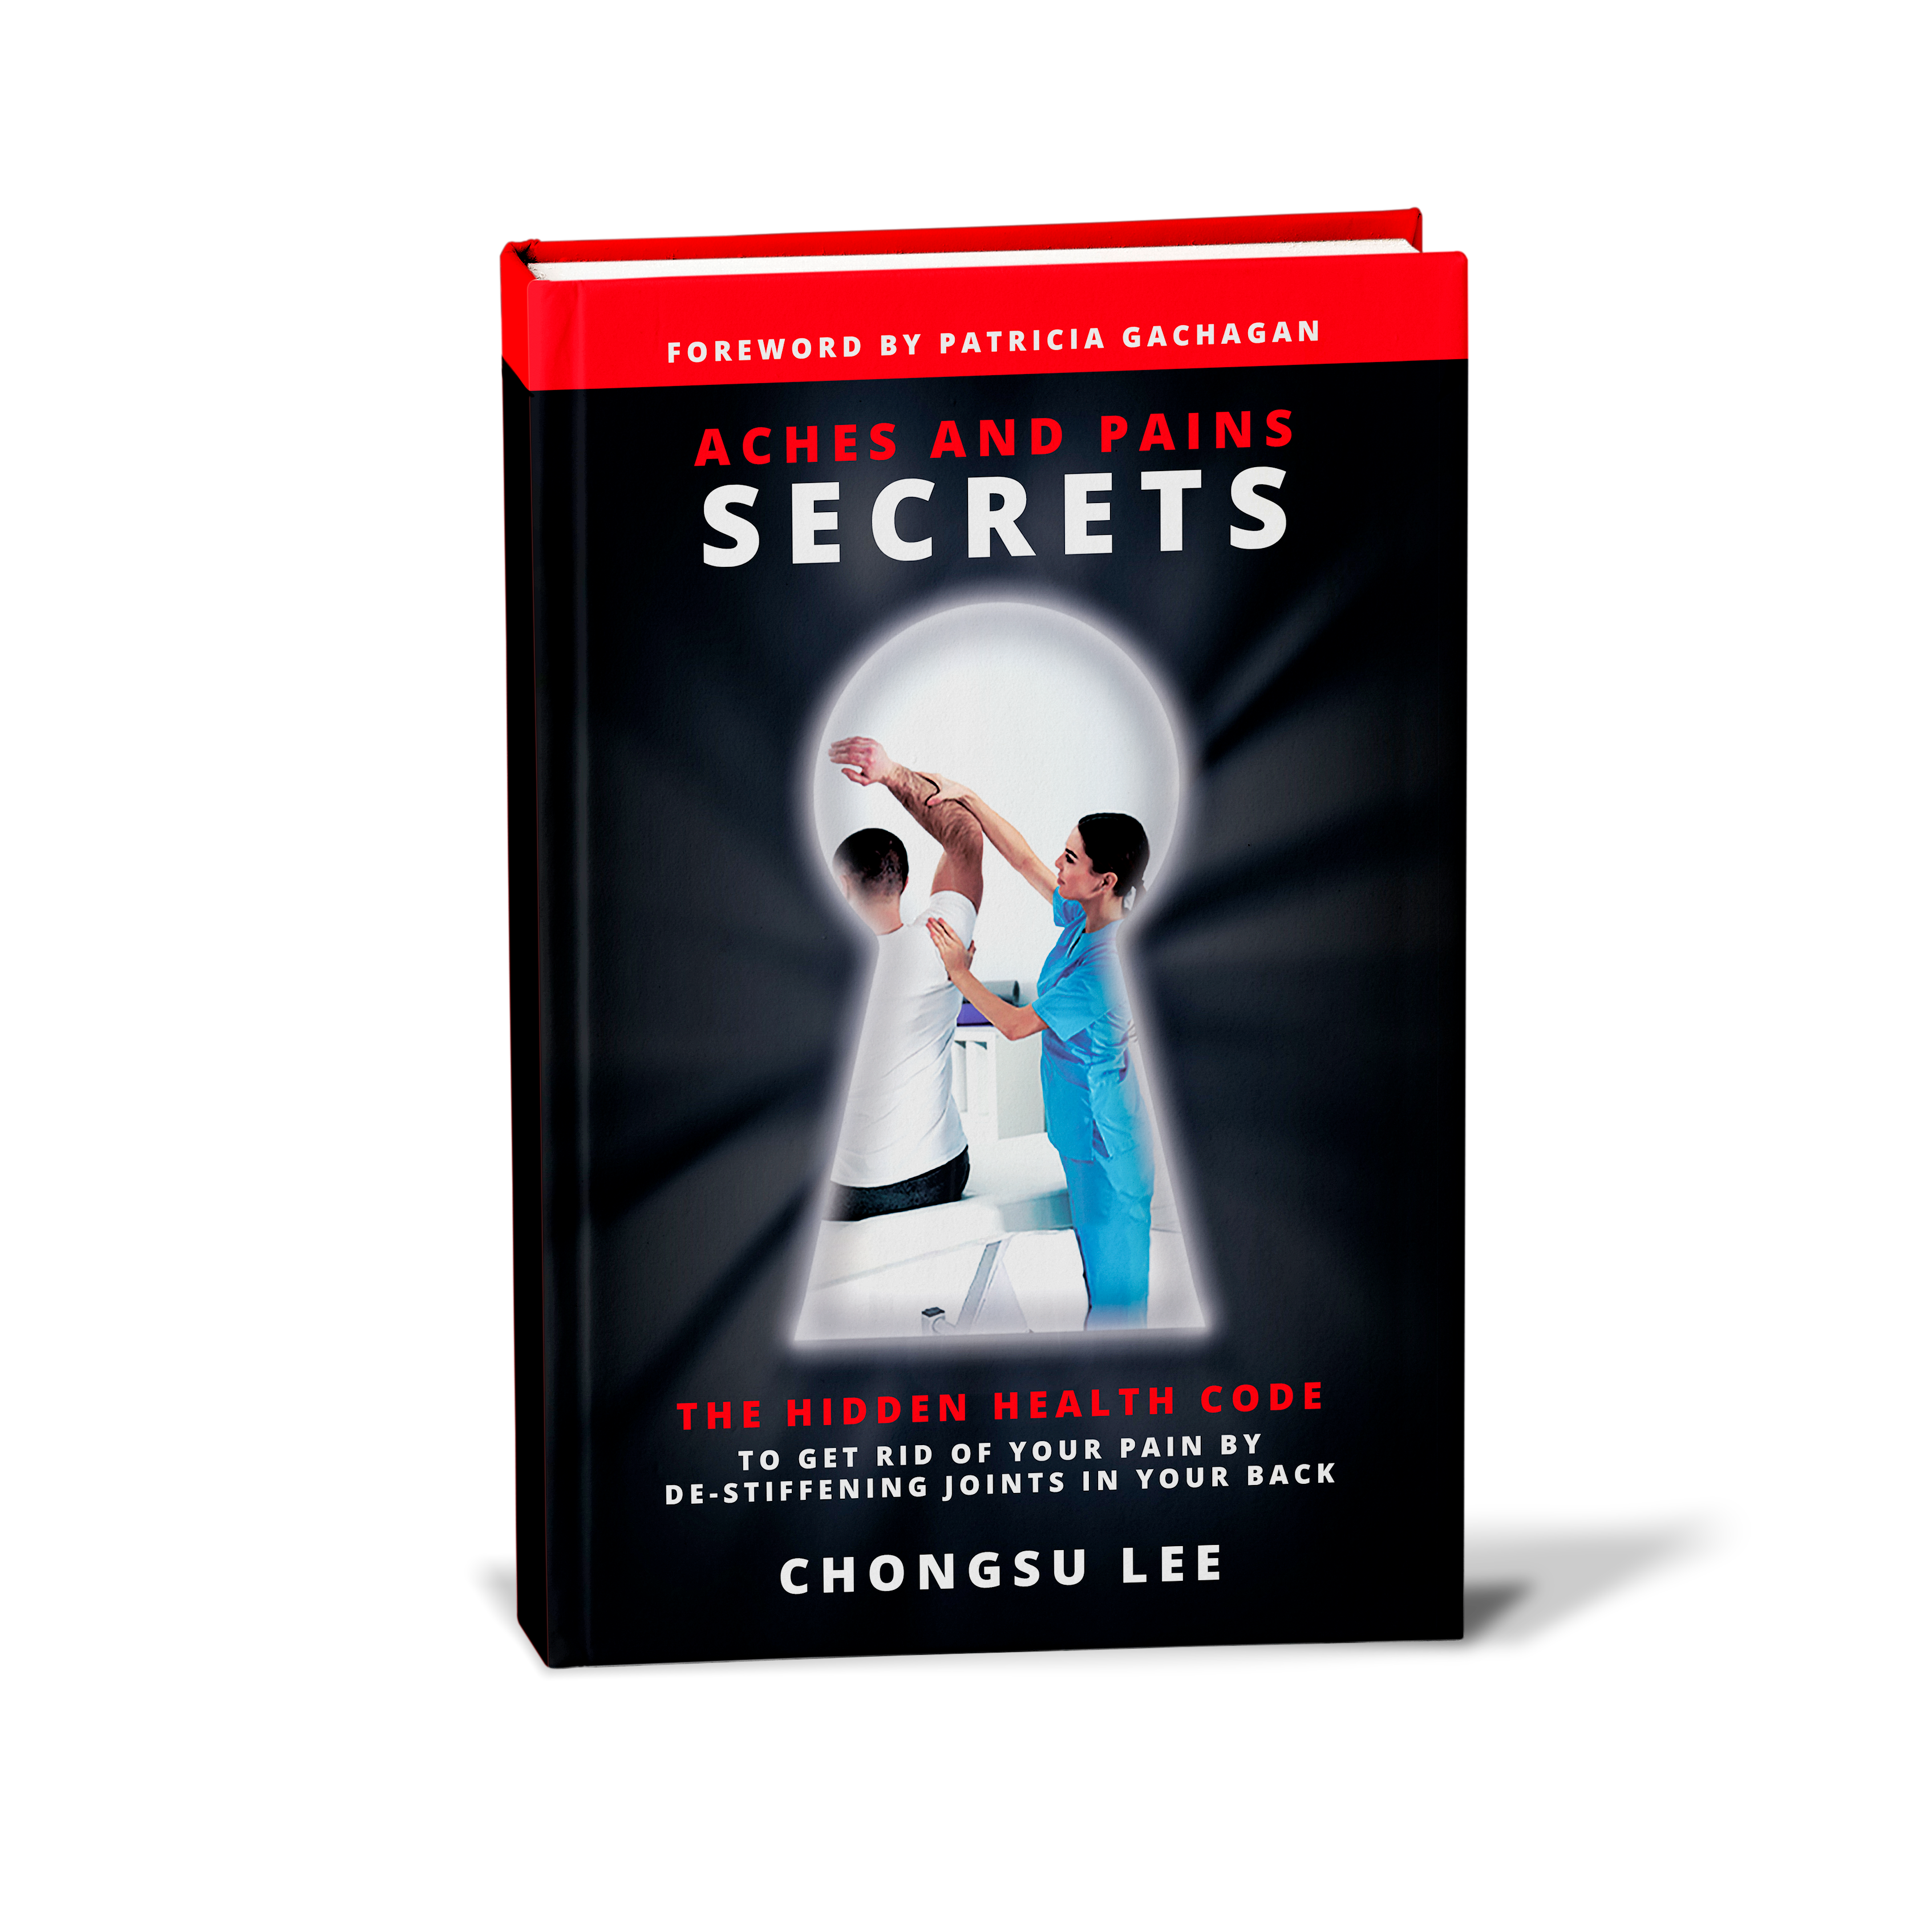 Aches-and-Pains-Secrets-Book-Cover-Mockup-Front